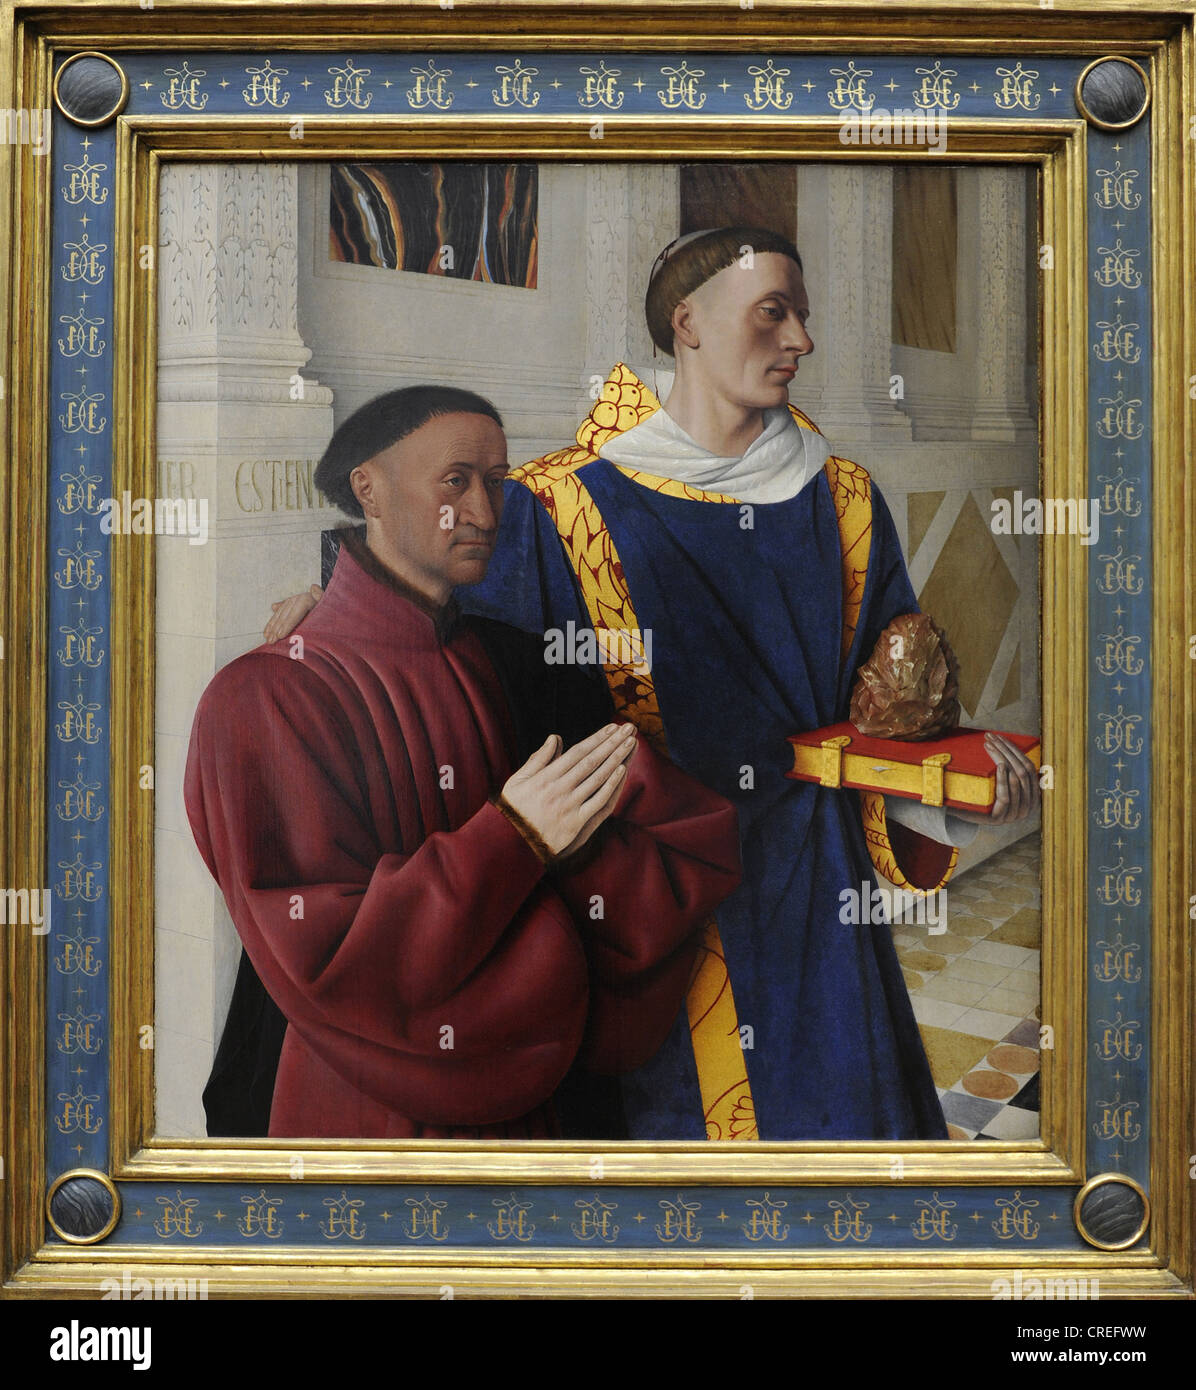 Jean Fouquet (1420-1481). French painter. Melun Diptych. Left wing depicting Etienne Chevalier with his patron St. Stephen. Stock Photo